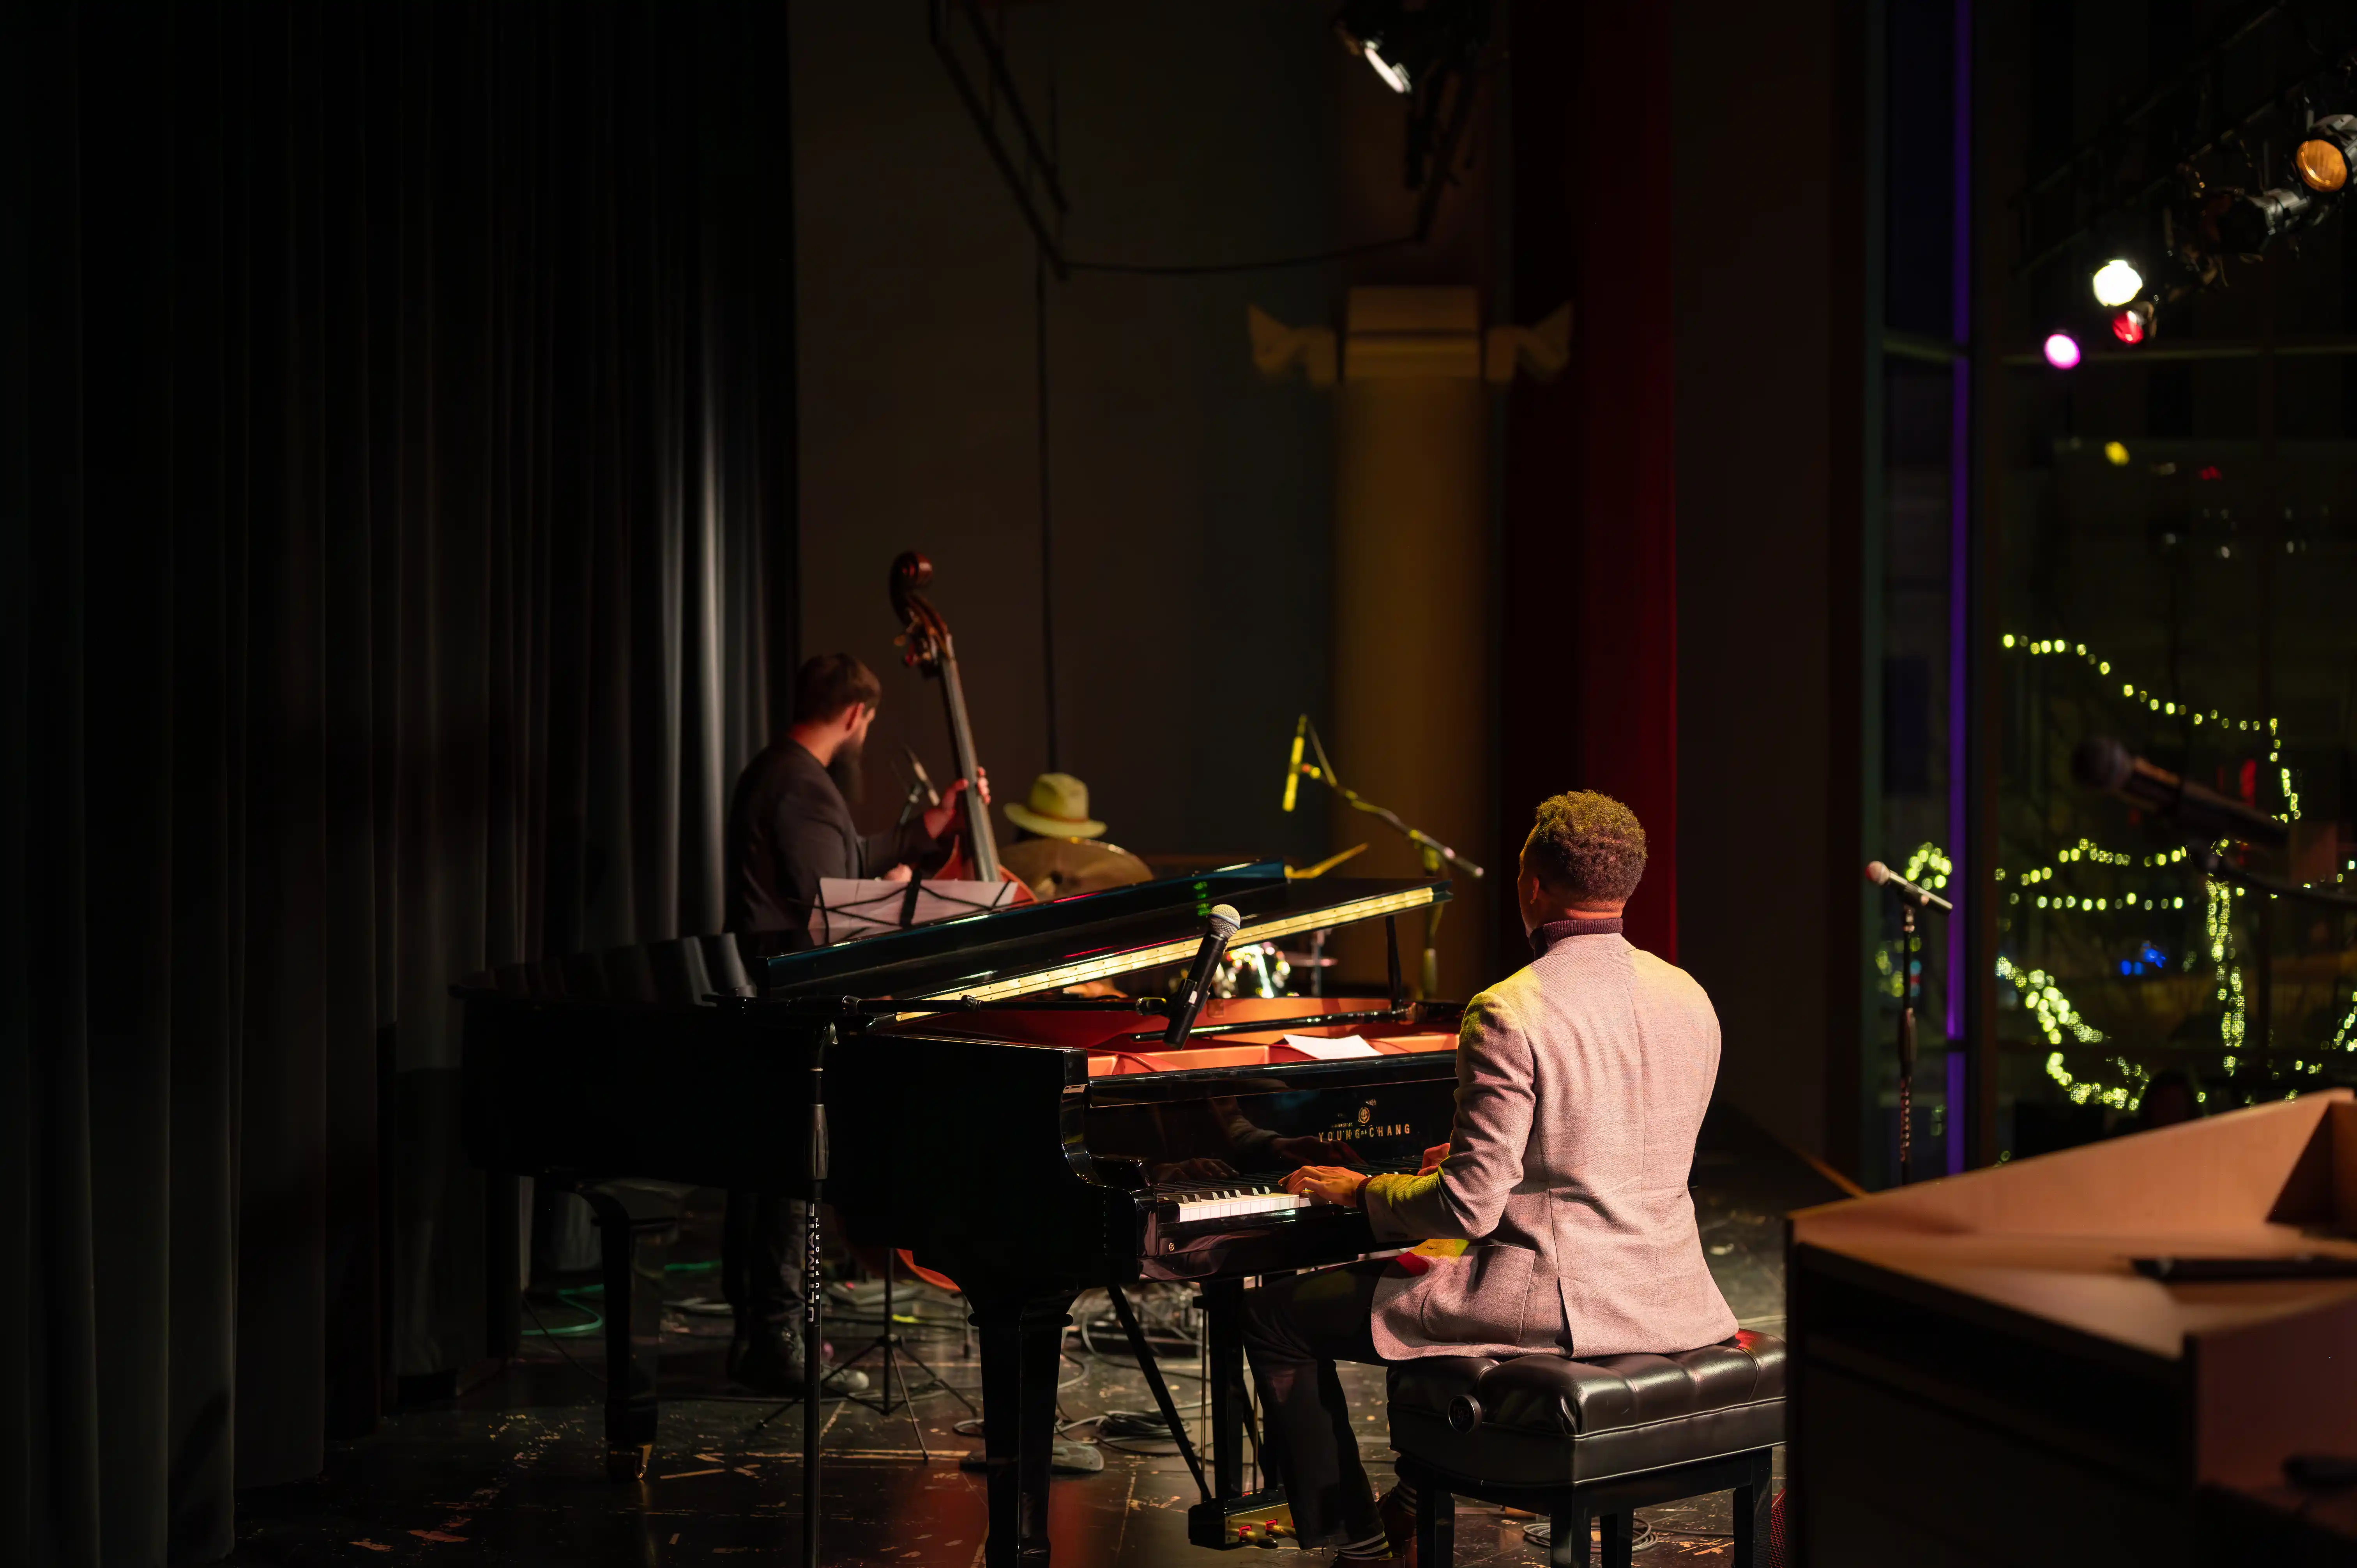 Musicians on stage with a pianist in focus and a double bass player in the background during a live performance.